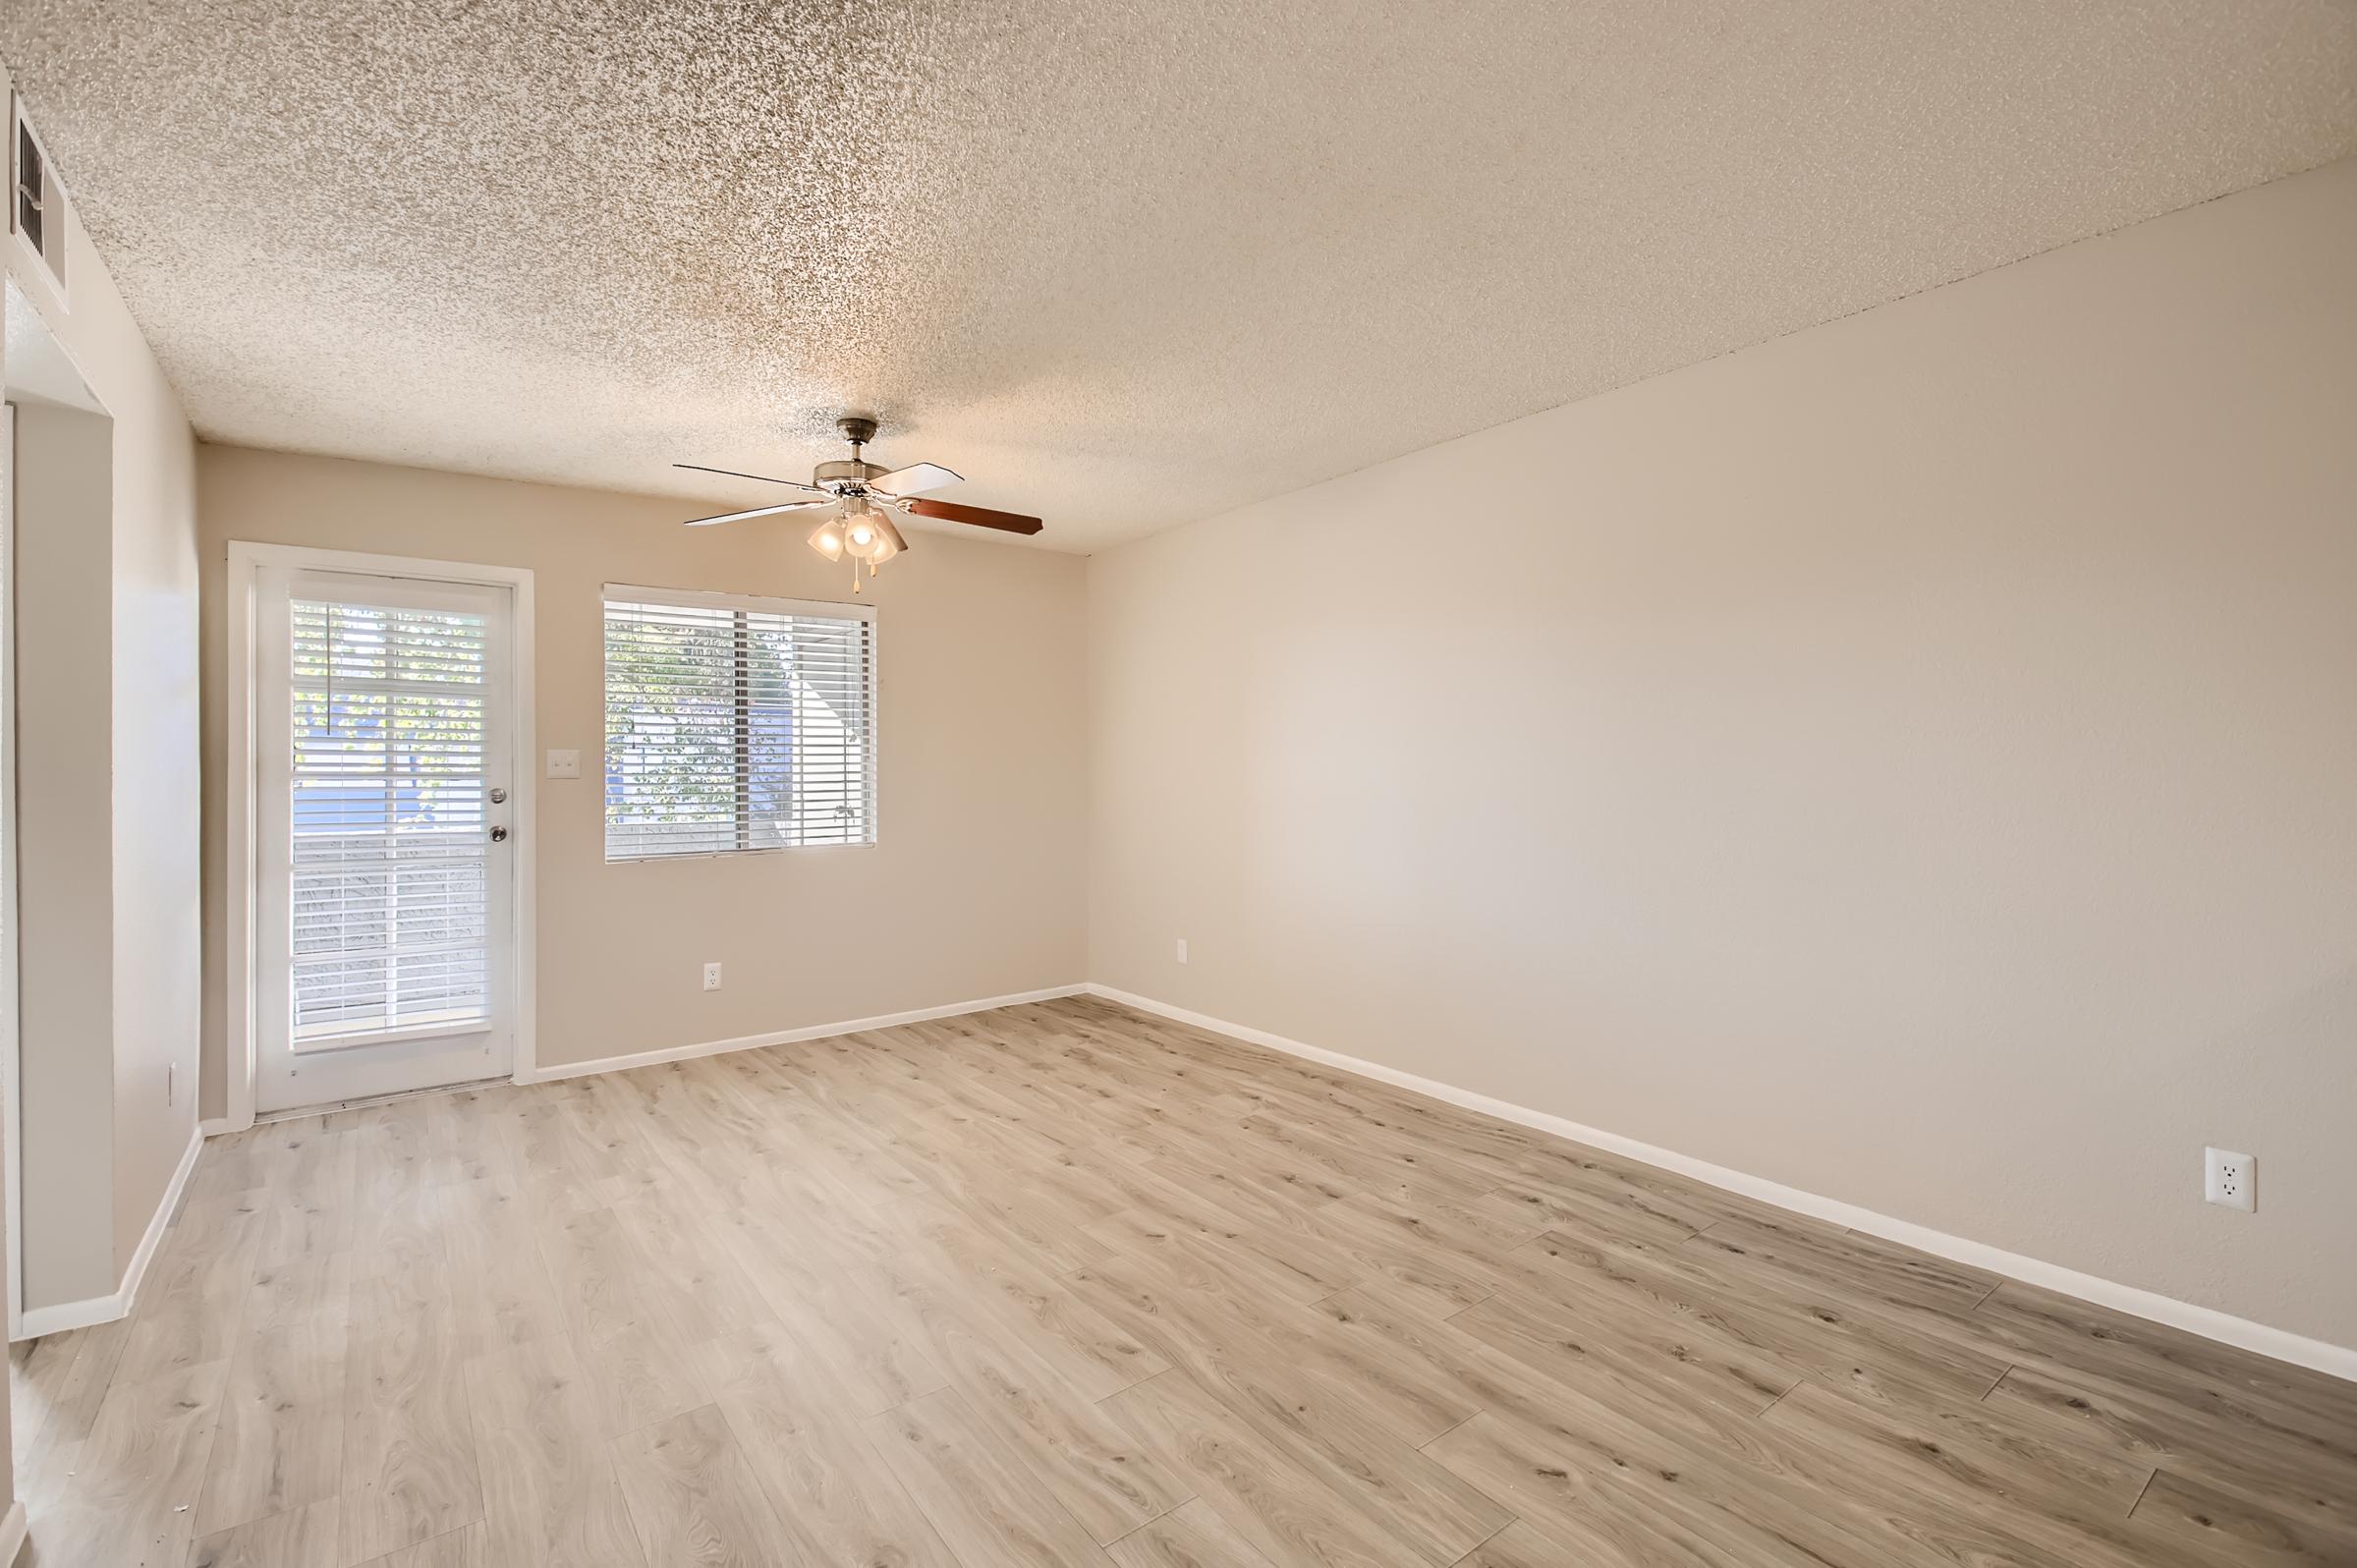 Phoenix apartment empty white room with a wooden floor, window, door and ceiling fan in the front